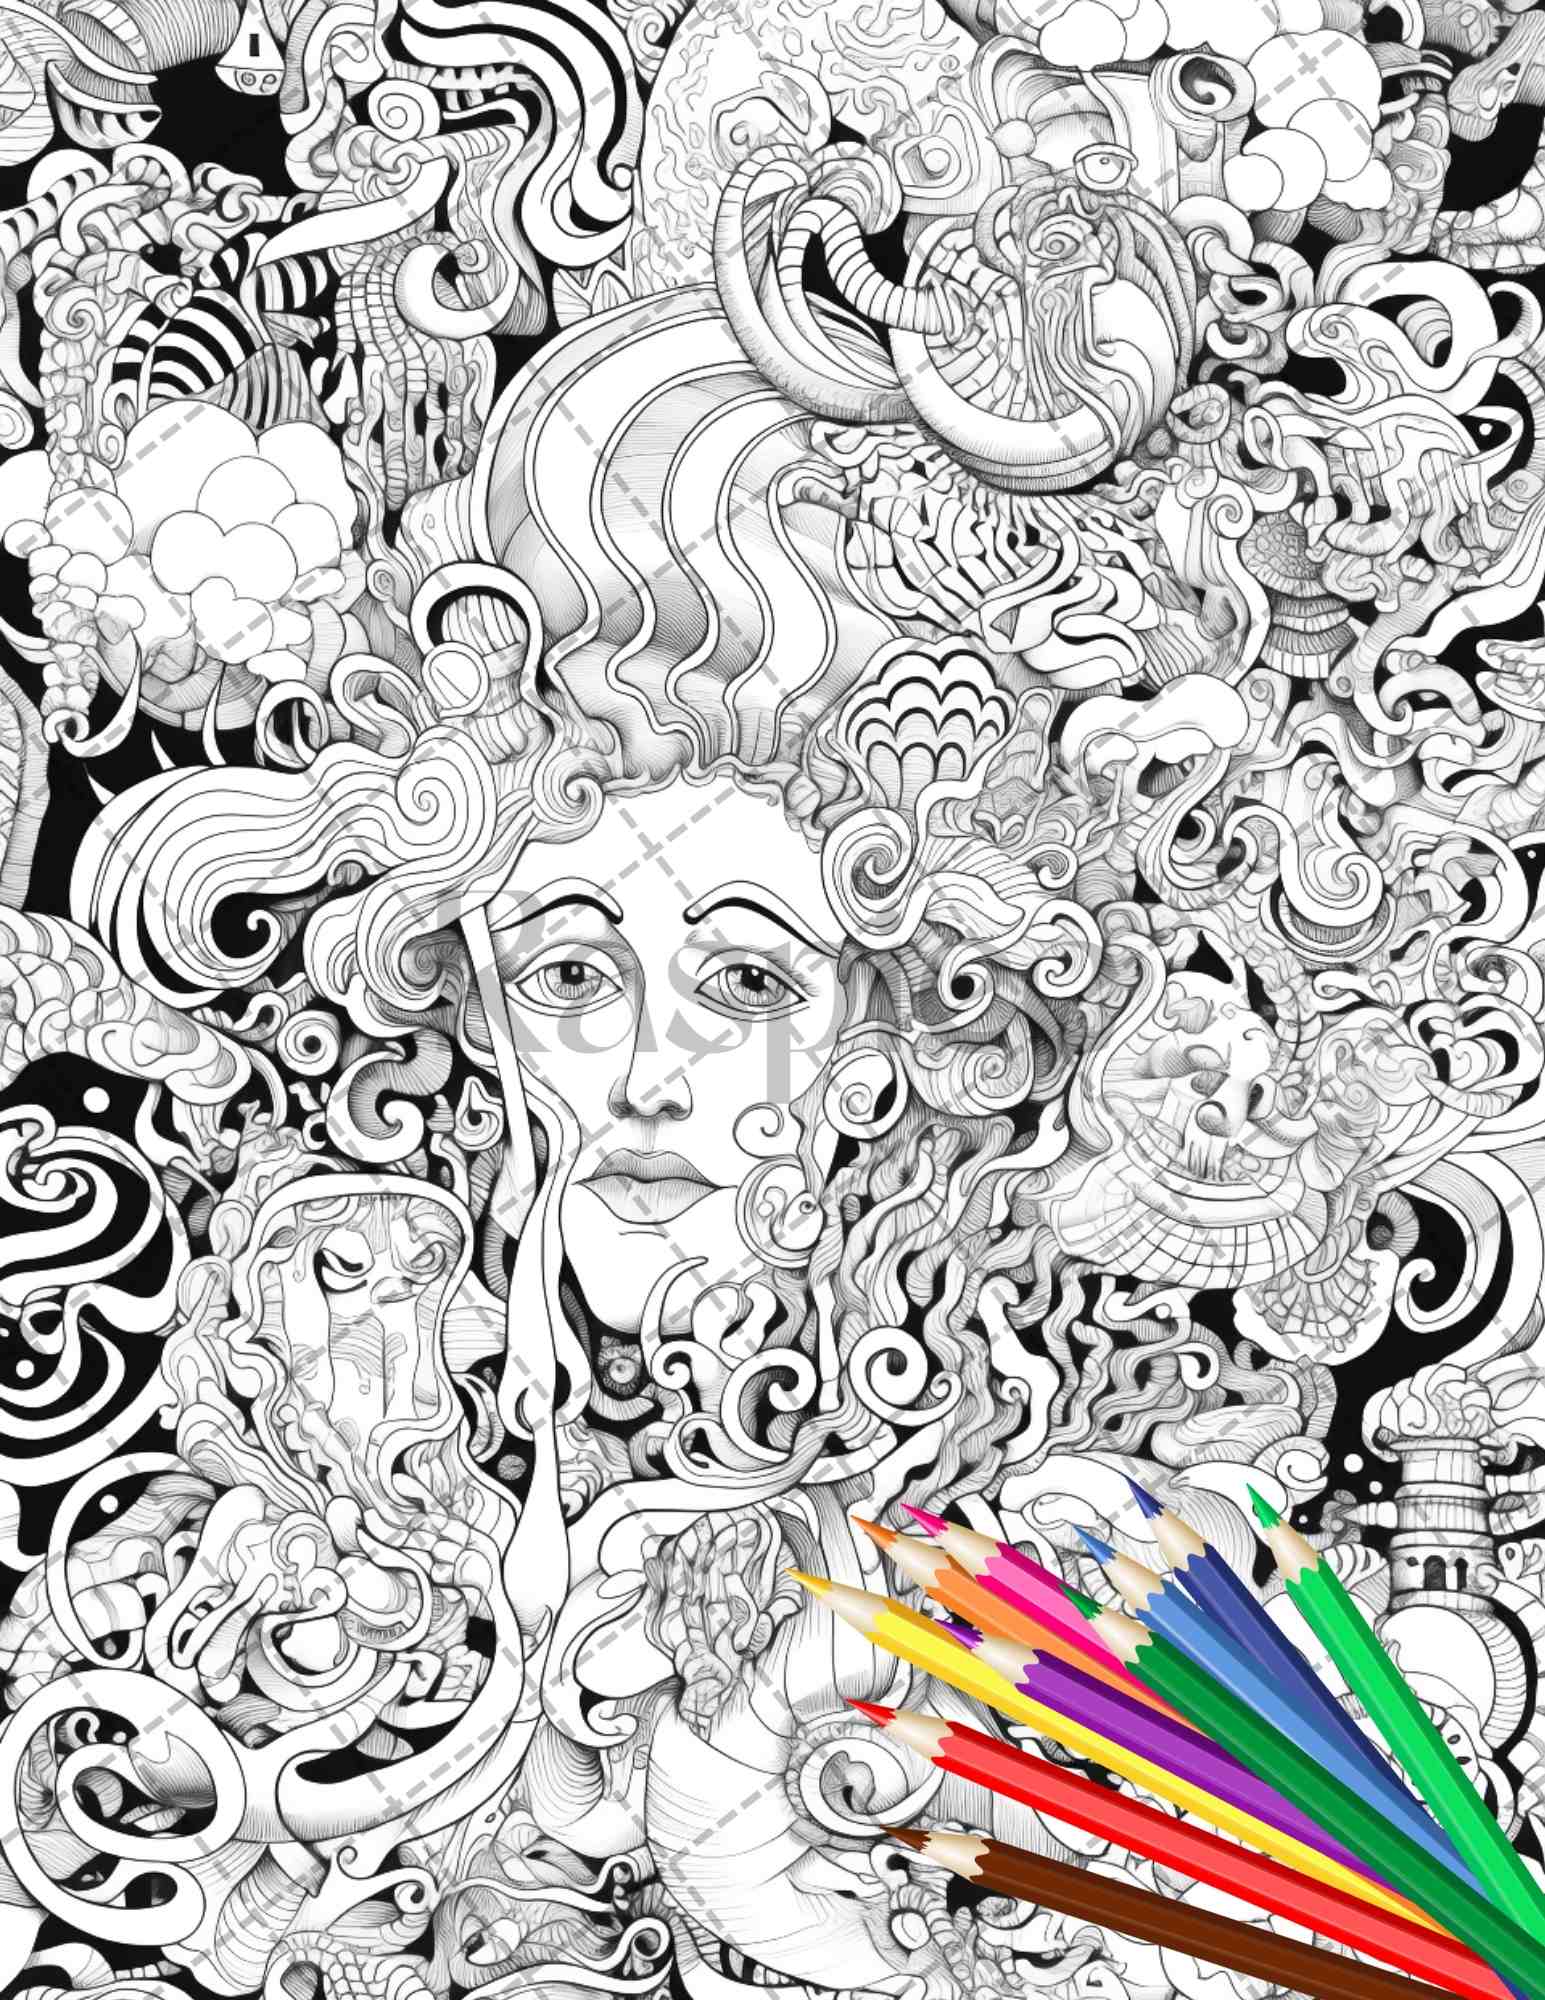 Stoner Coloring Book for Adult 39 Psychedelic Coloring Pages